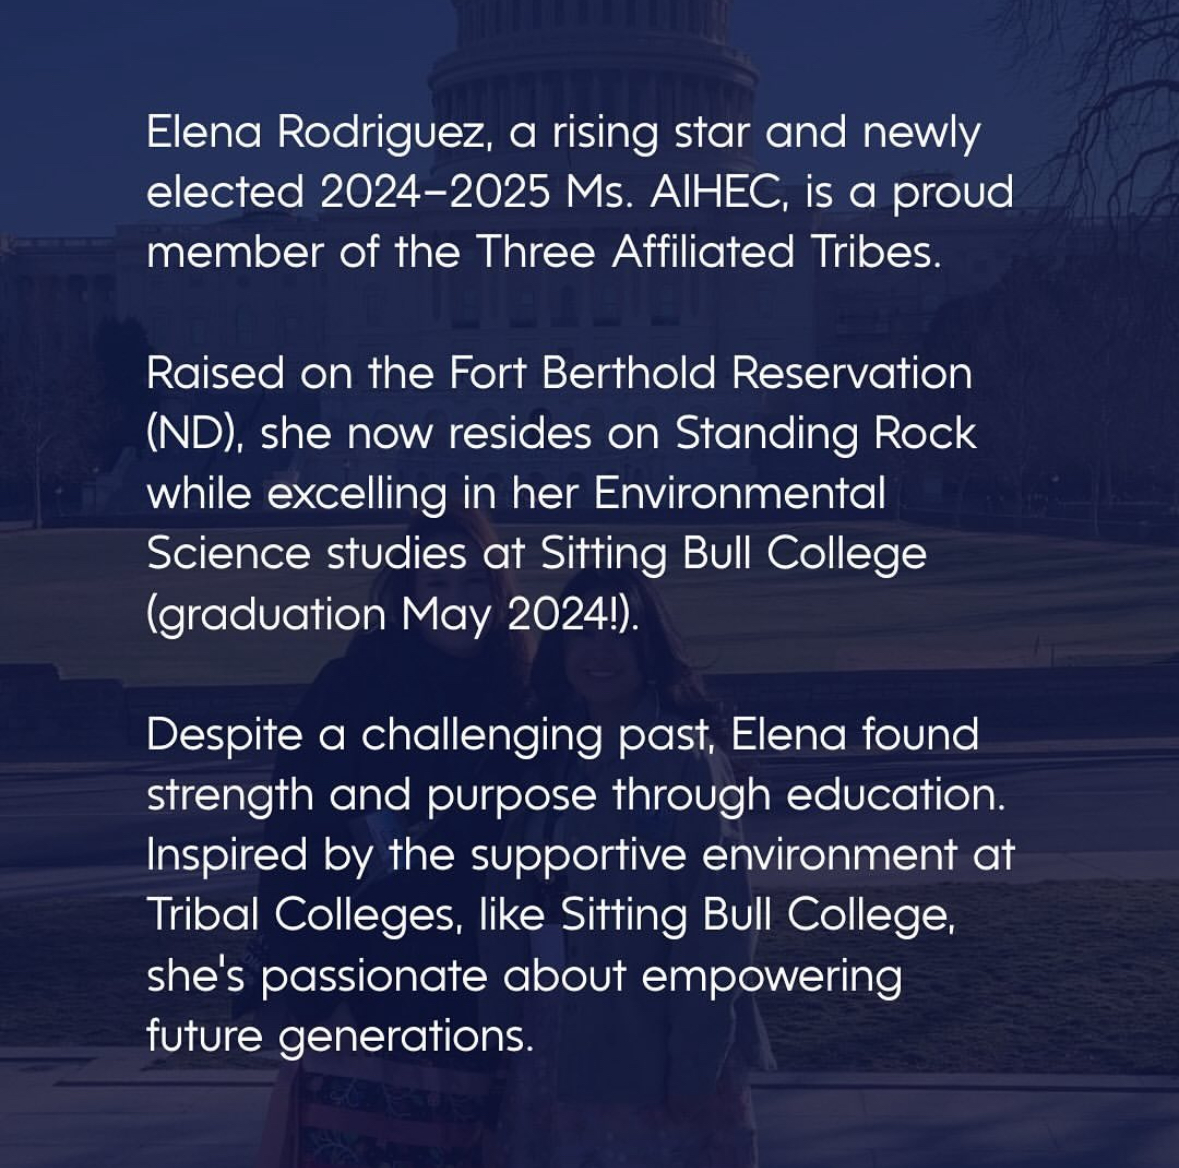 Excited to support Indigenous and Native American students on their journey to higher education! Get to know more about @SittingBullColl Student of the Year Elena Rodriguez ✨ #SittingBullCollege #TCU #StudentFreedom